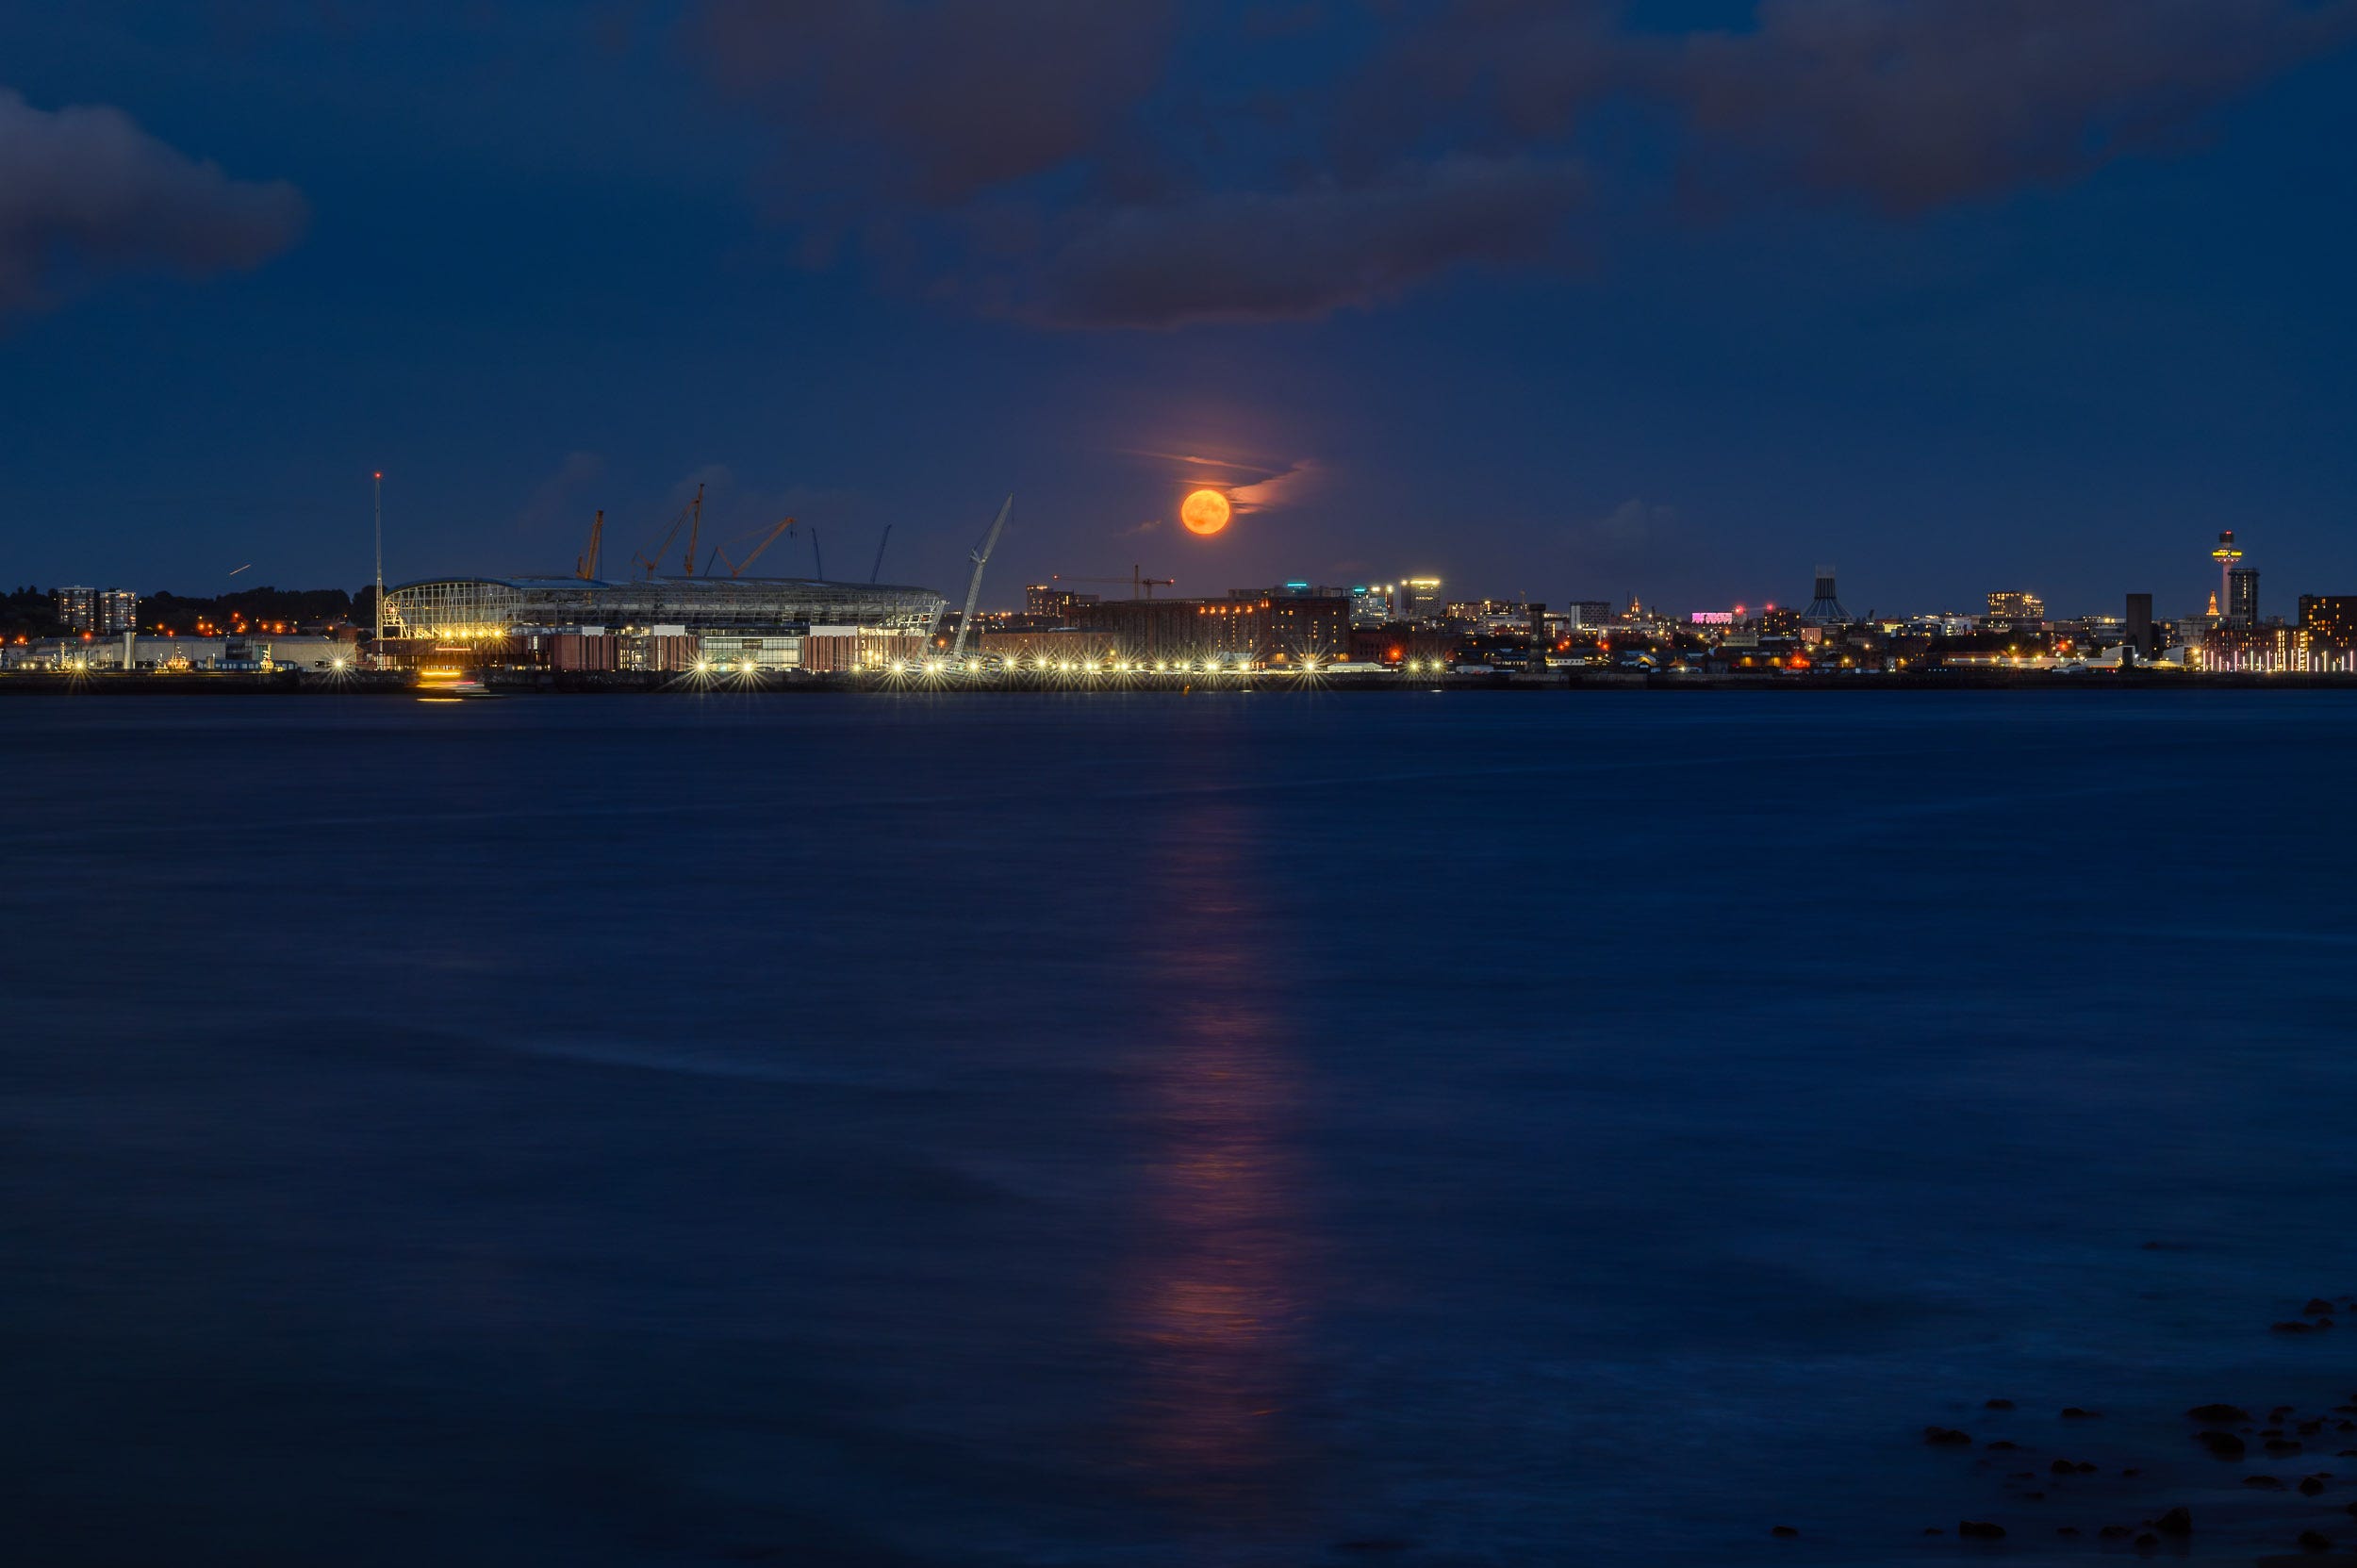 Super blue moon rises through the clouds over the Liverpool waterfront. The river is calm and the reflection of the orange moon stretches across it.